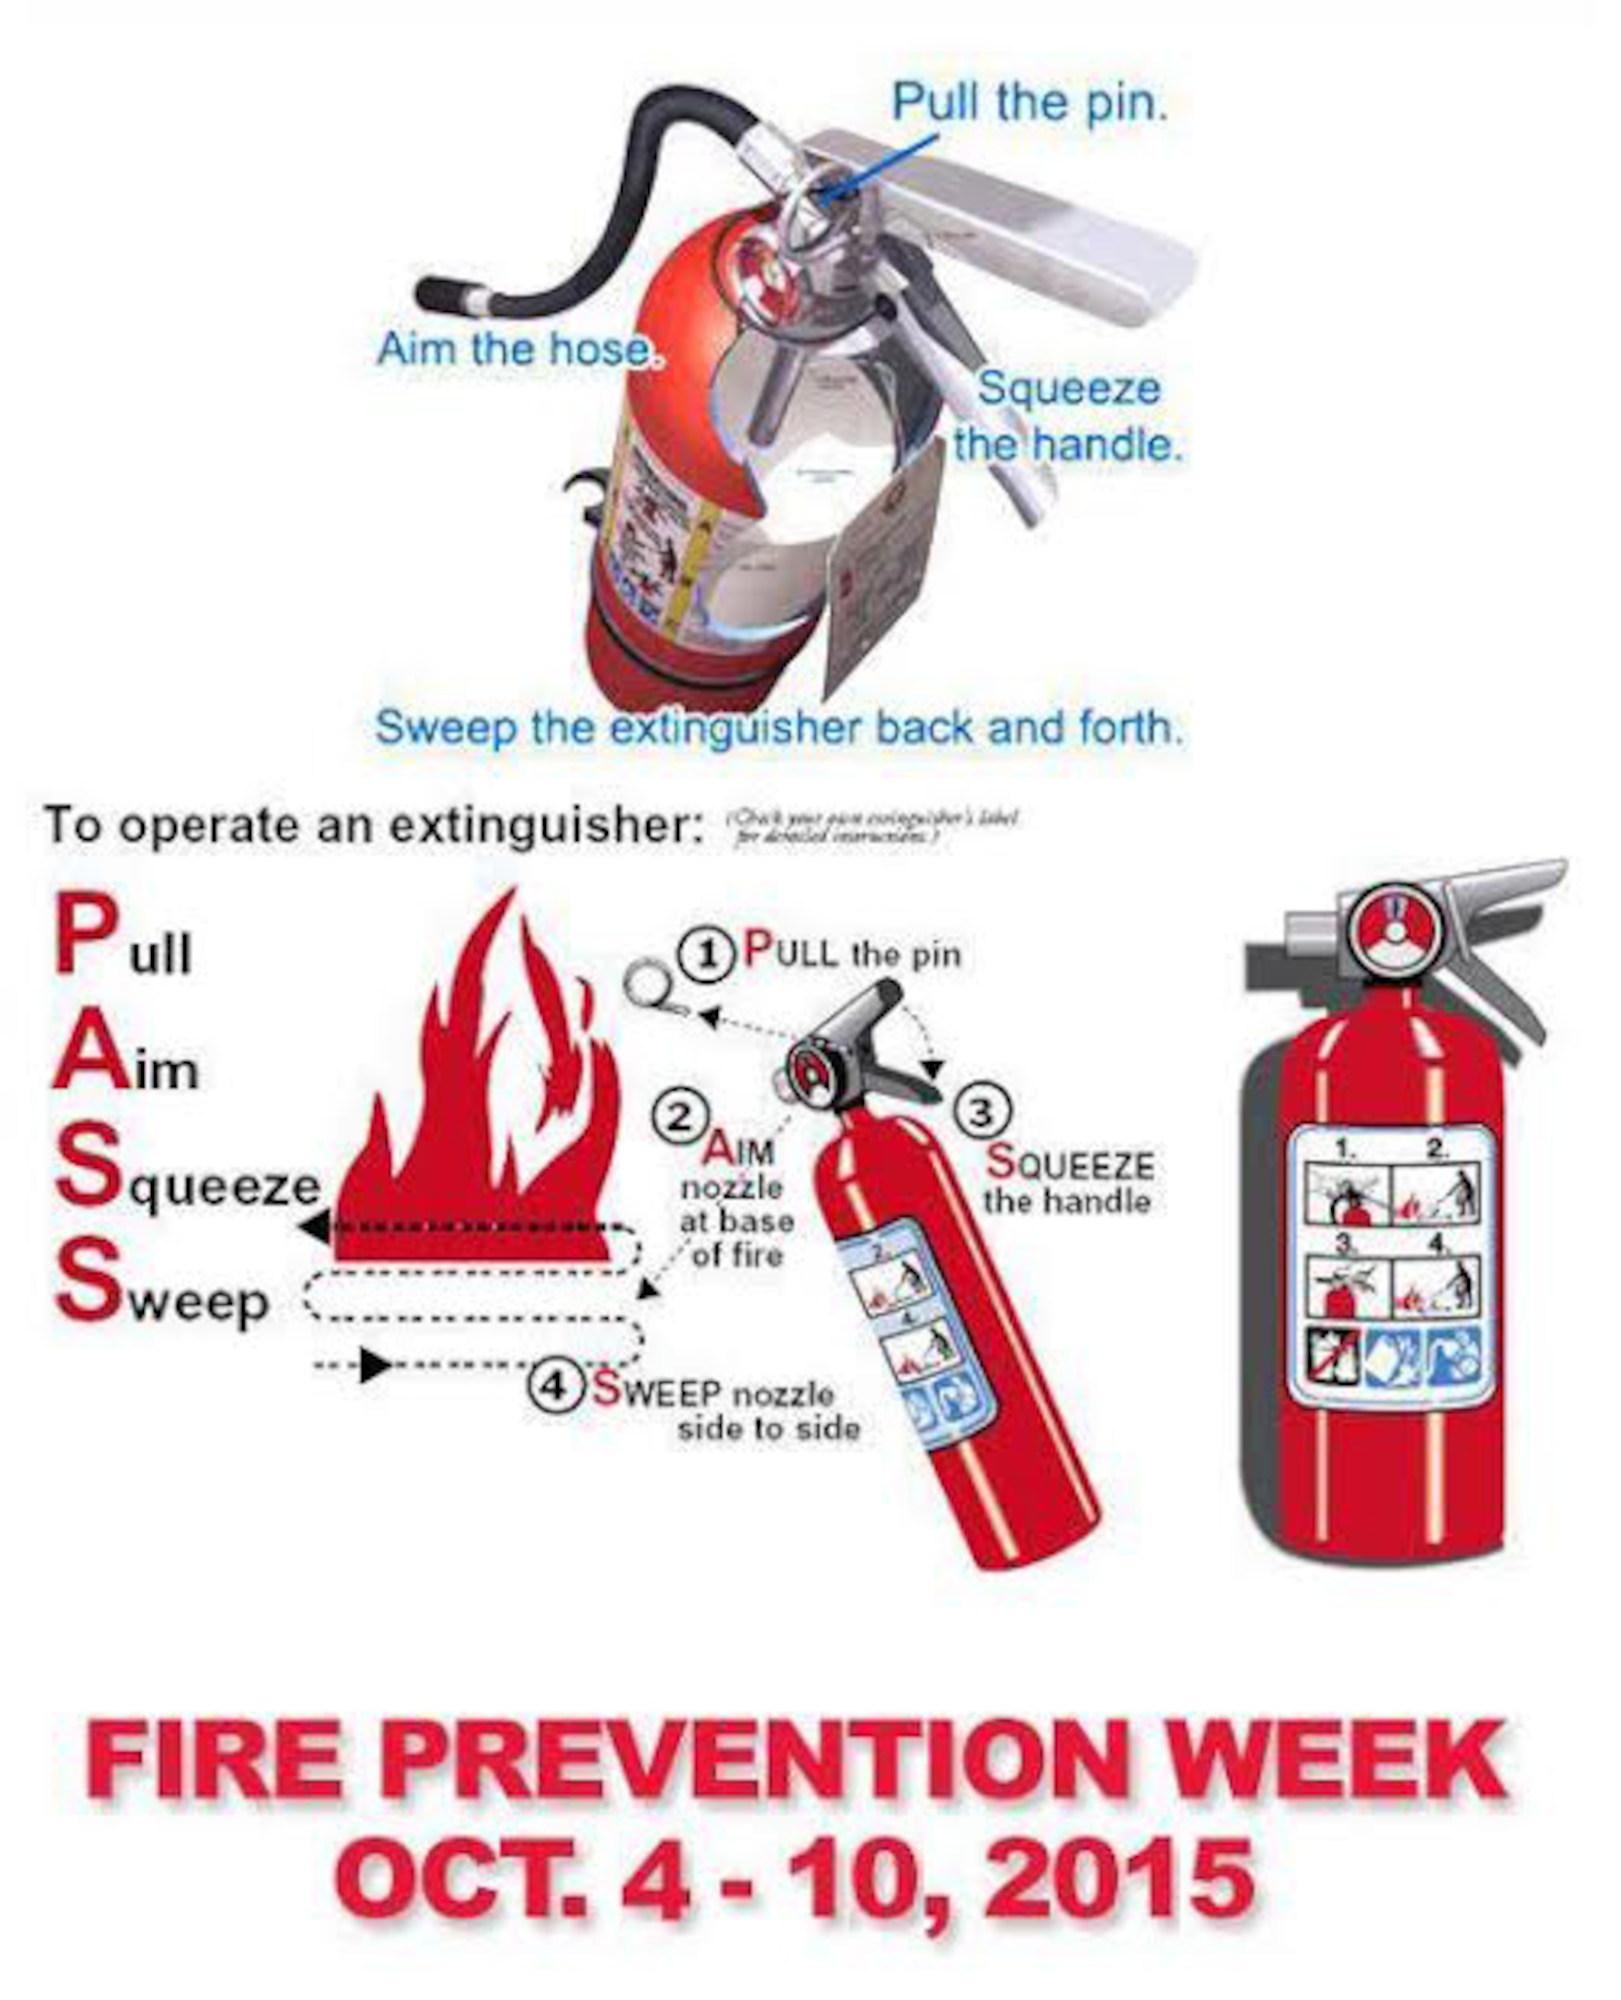 Fire Prevention Week is recognized during Oct. 4-10, 2015. Here's a reminder on how easy it is to use a fire extinguisher: Remember the acronym PASS stands for Pull, Aim, Squeeze and Sweep. (U.S. Air Force graphic illustration/Quinn Jacobson)